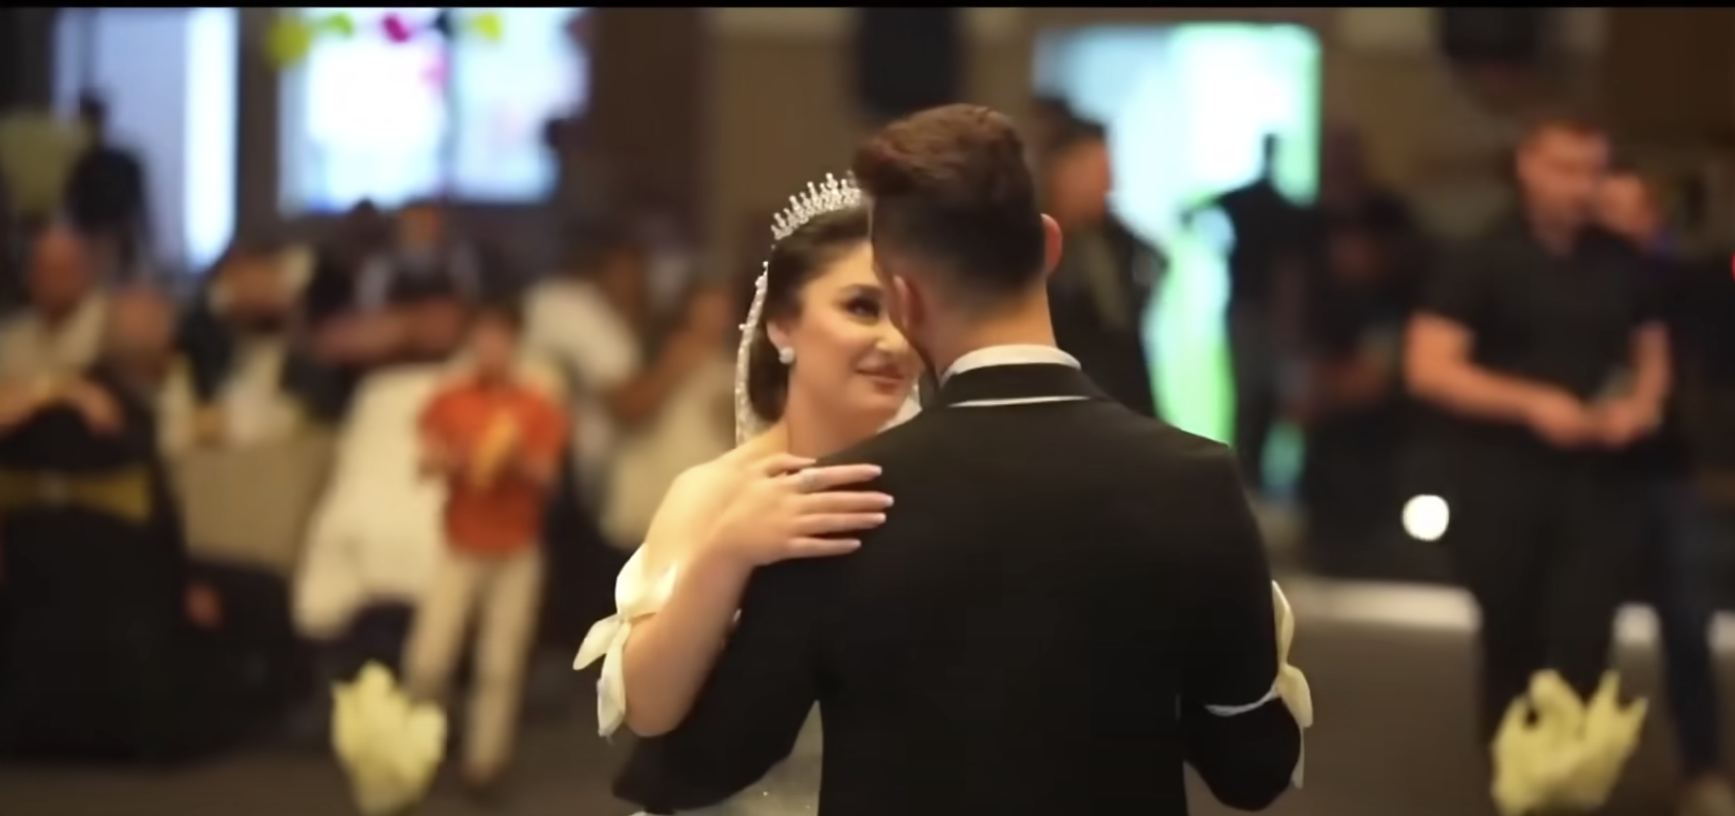 Revan and Hannen Isho dancing on their wedding day | Source: youtube.com/@SkyNews